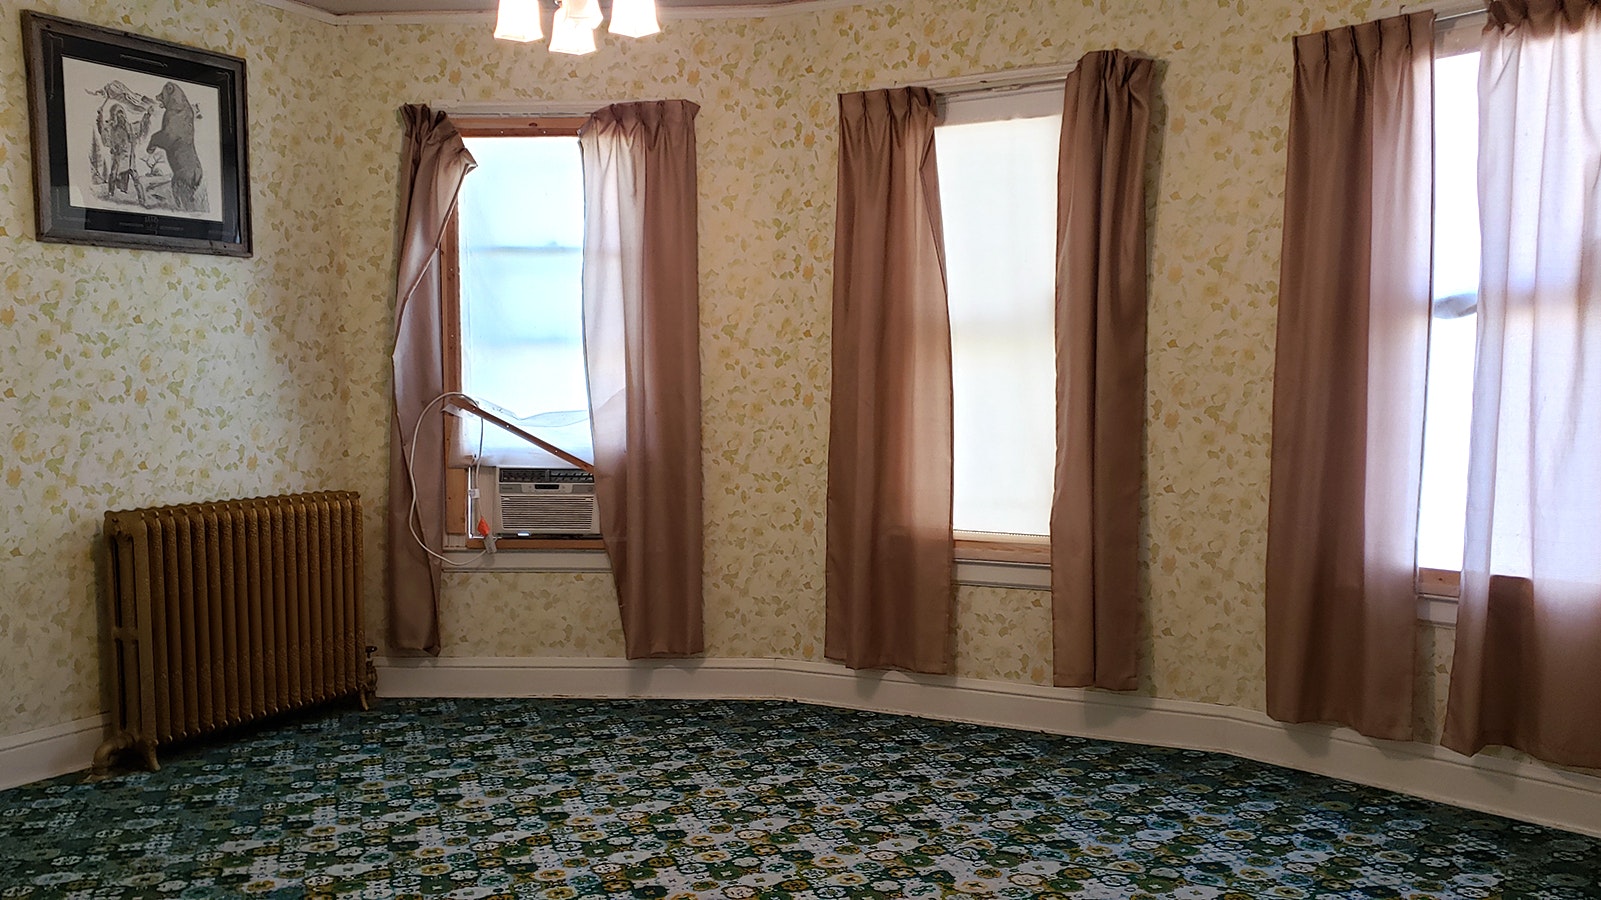 Another of the bedrooms with dated decor.